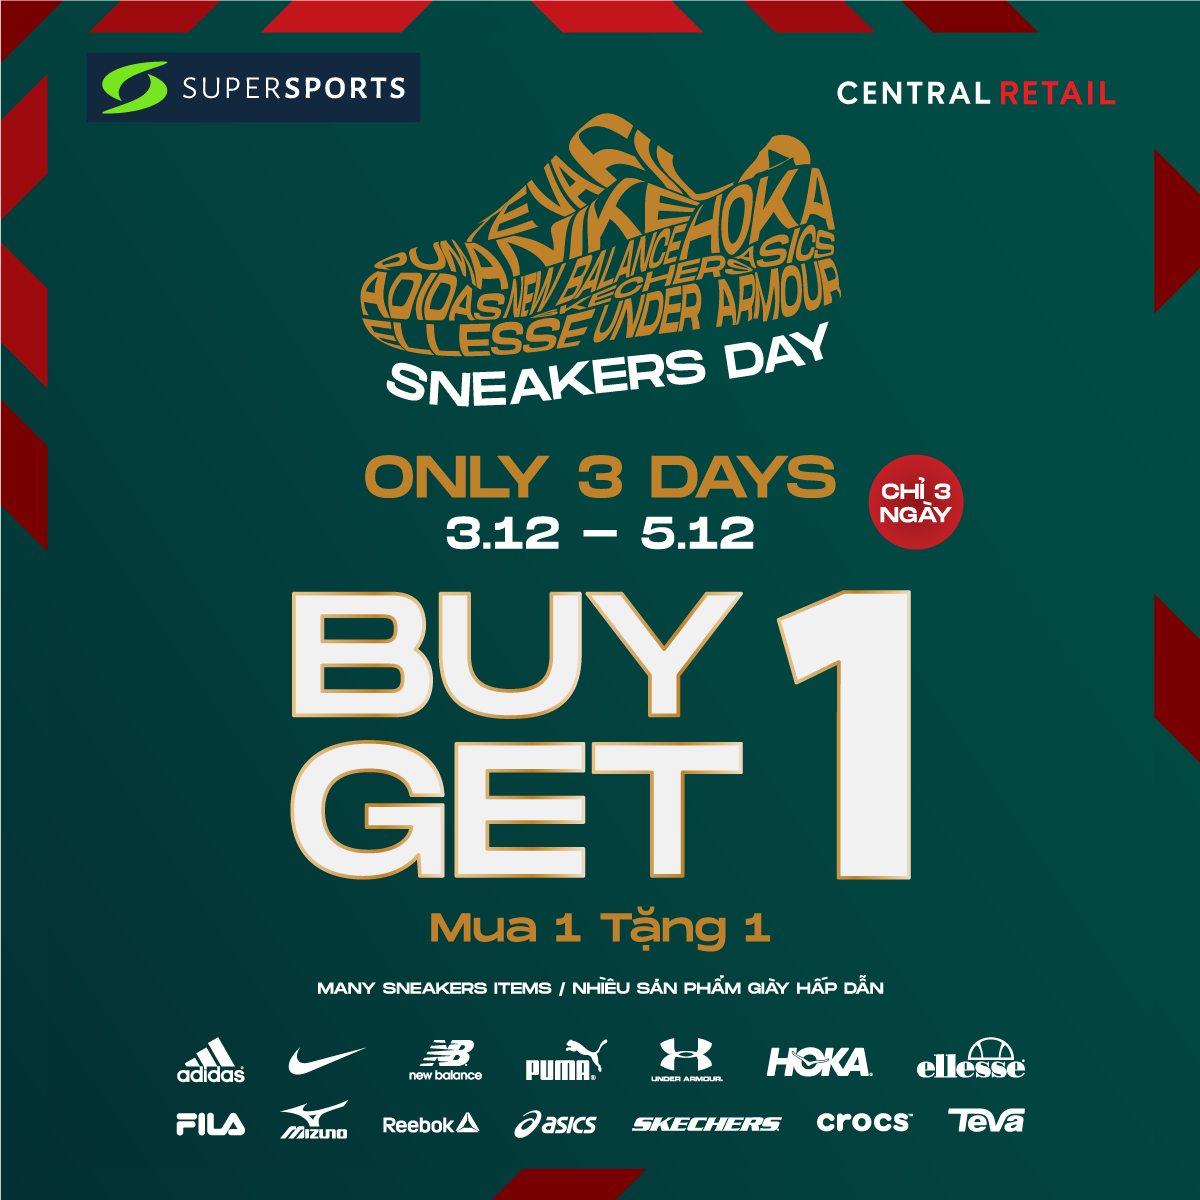 ⭐ SUPERSPORTS SNEAKERS DAY – BIG SALE BUY 1 GET 1 MANY HOT PRODUCTS